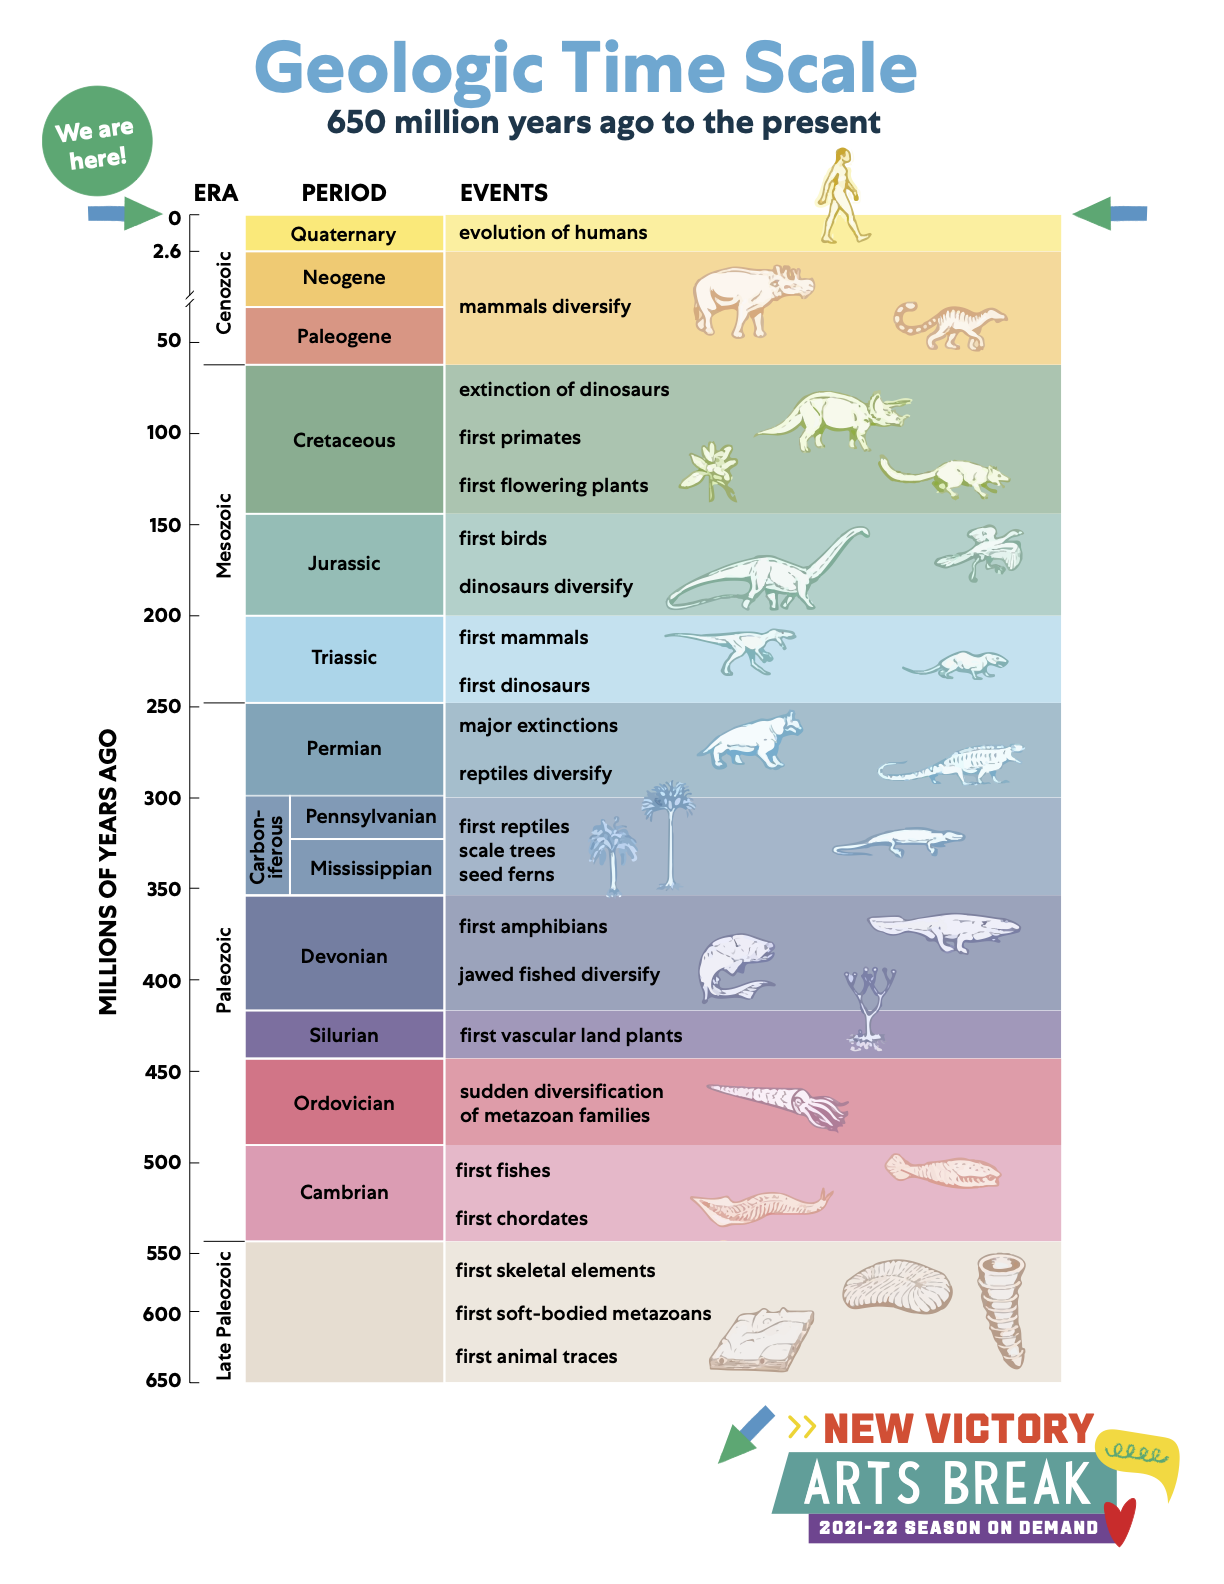 Geologic Timescale spanning 650 million years of life